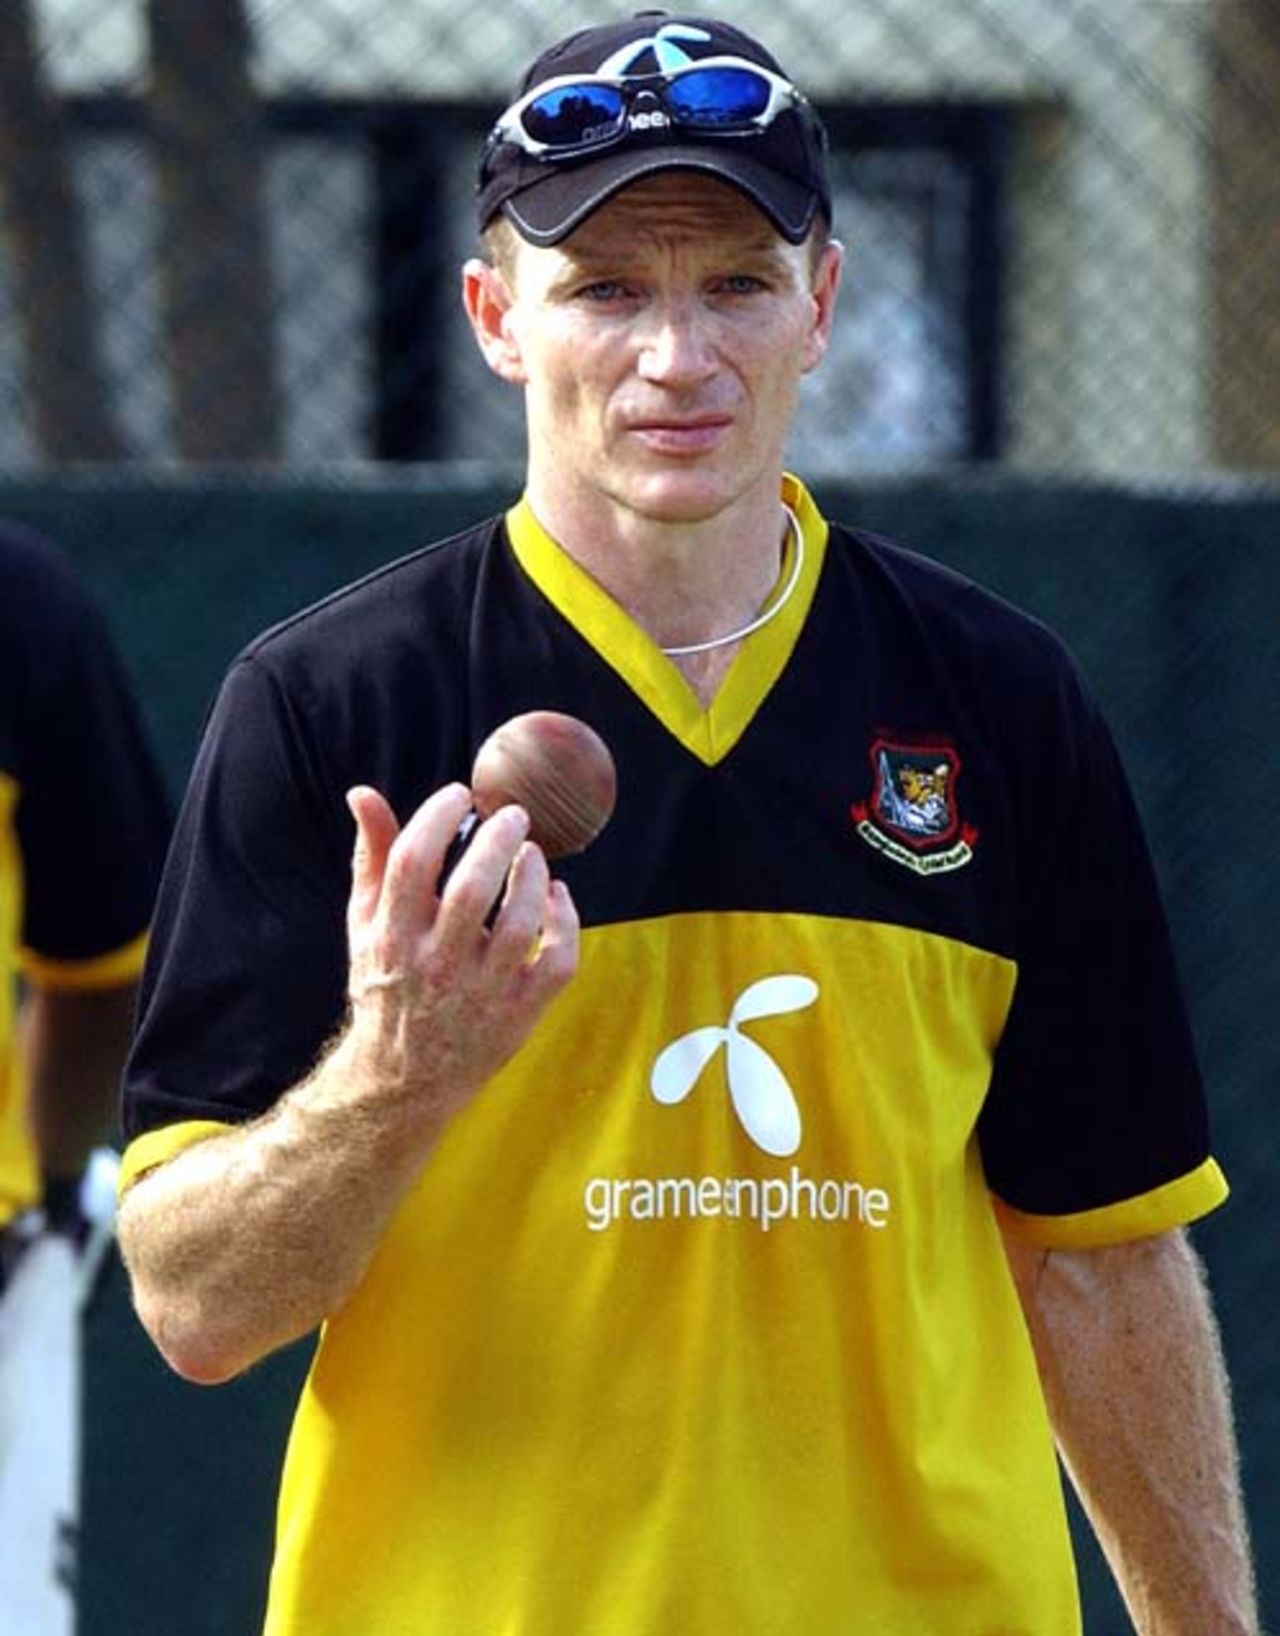 Bangladesh coach Shaun Williams prepares to deliver a ball during a net practice session at the Sinhalese Sports Club, Colombo, June 24, 2007